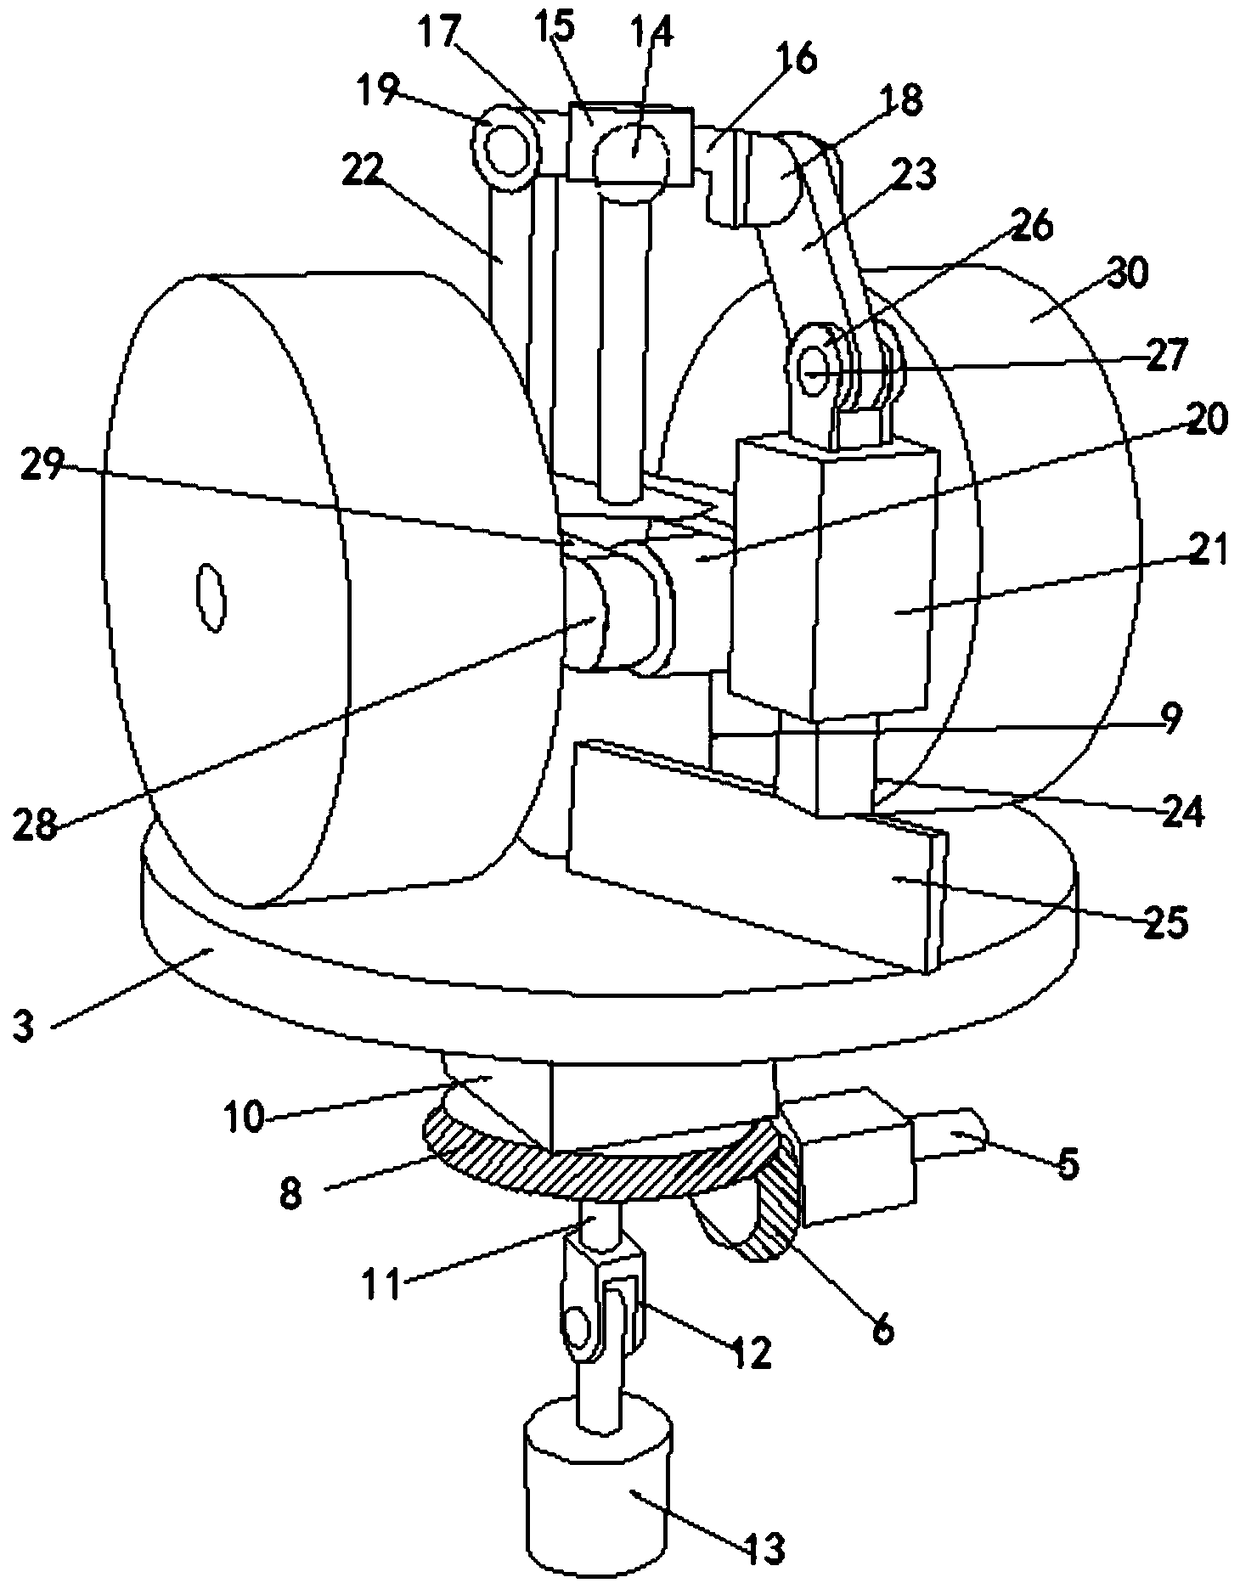 Powder grinding device convenient to operate